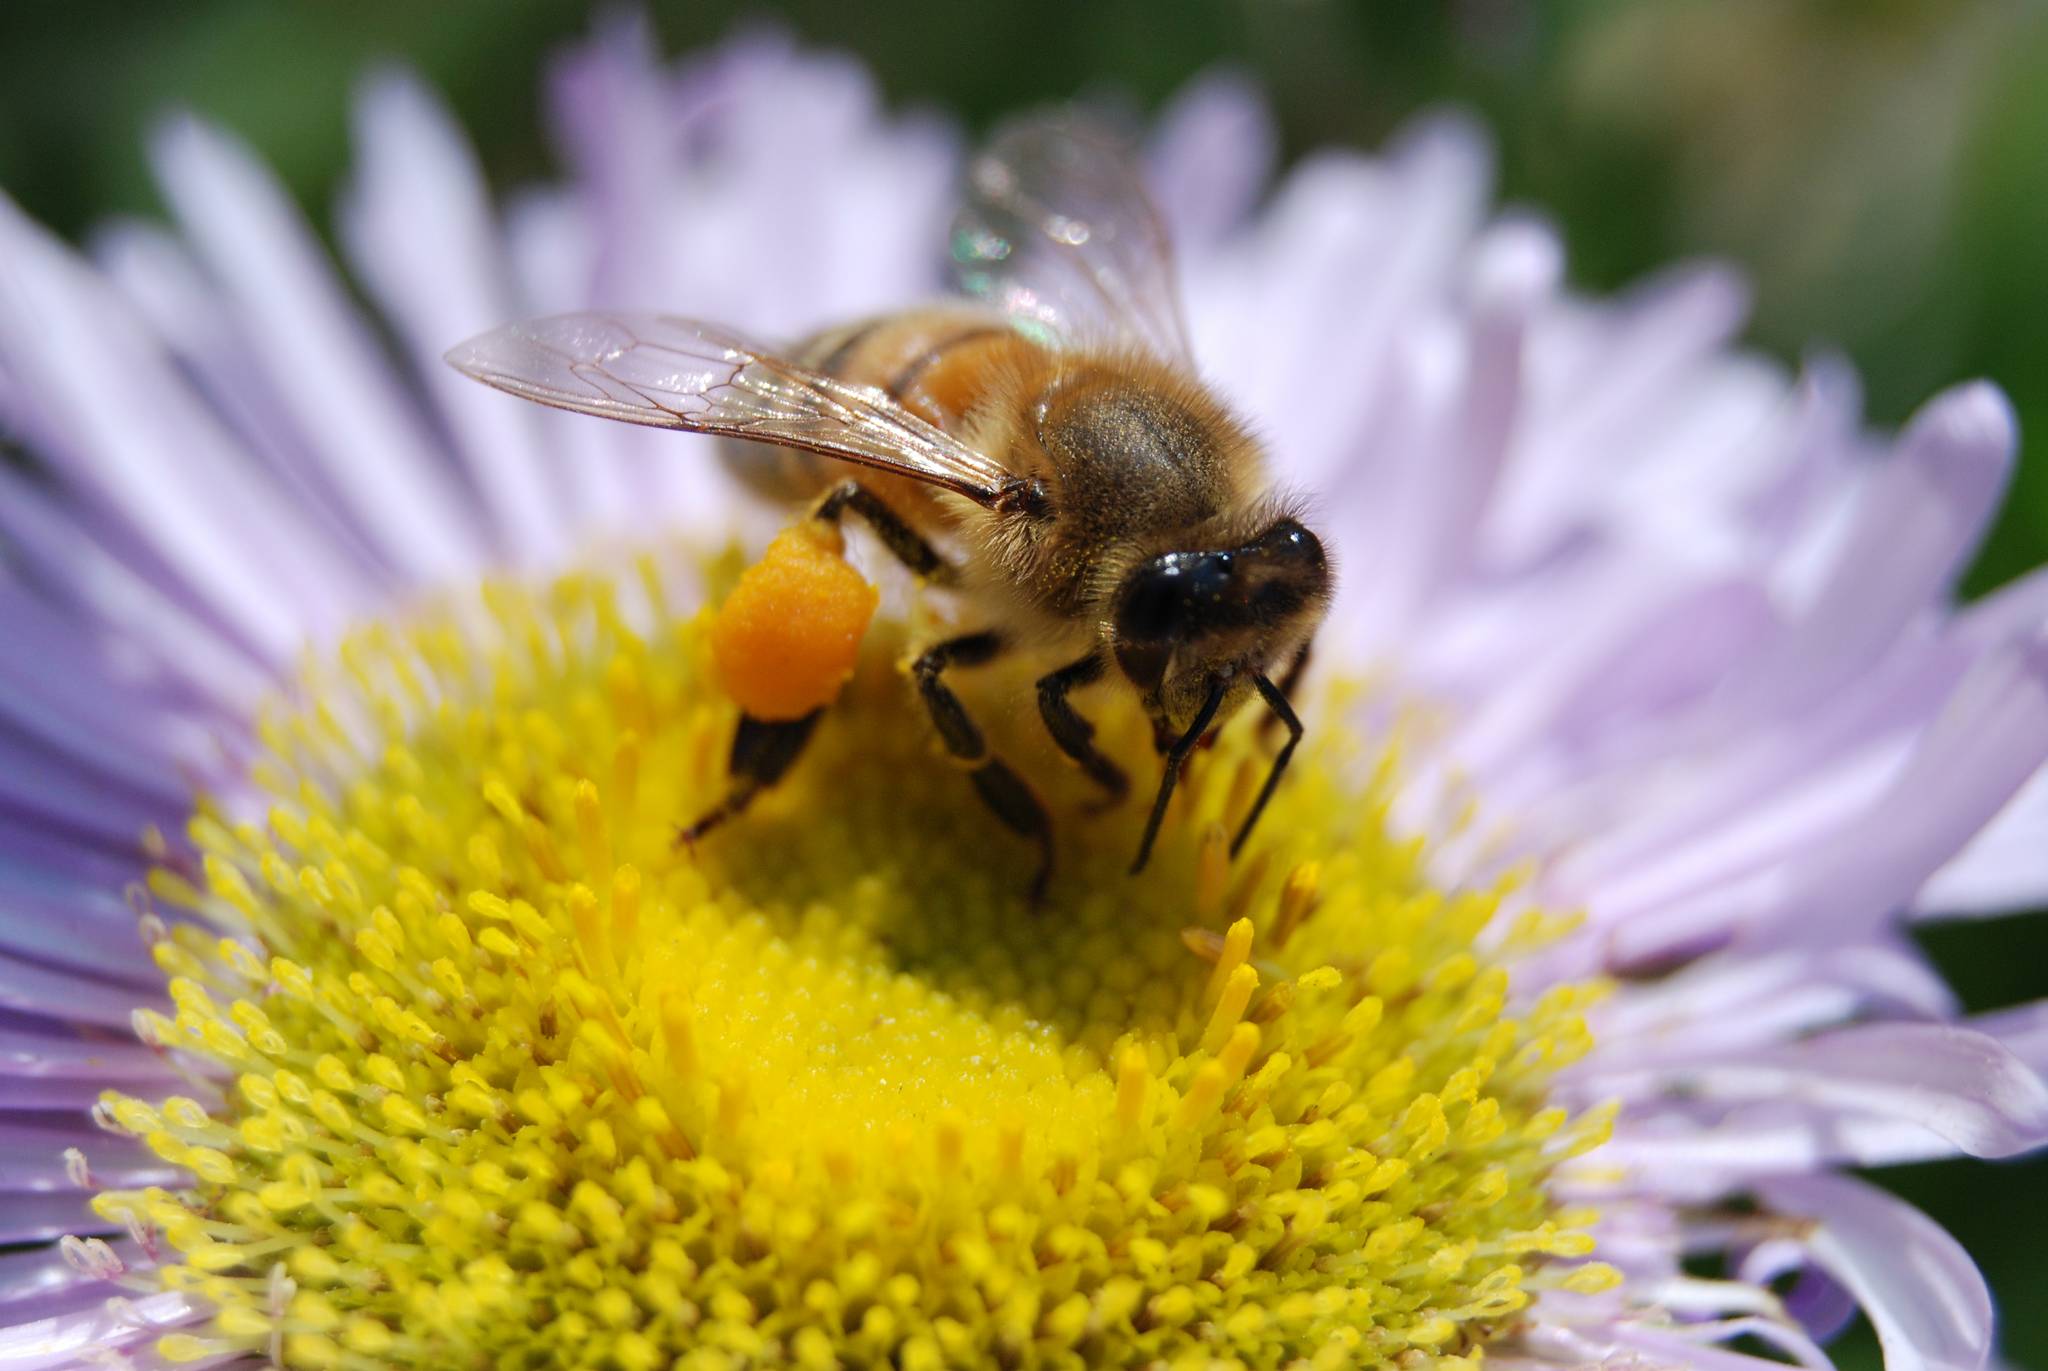 Aldi bans pesticides for the survival of bees